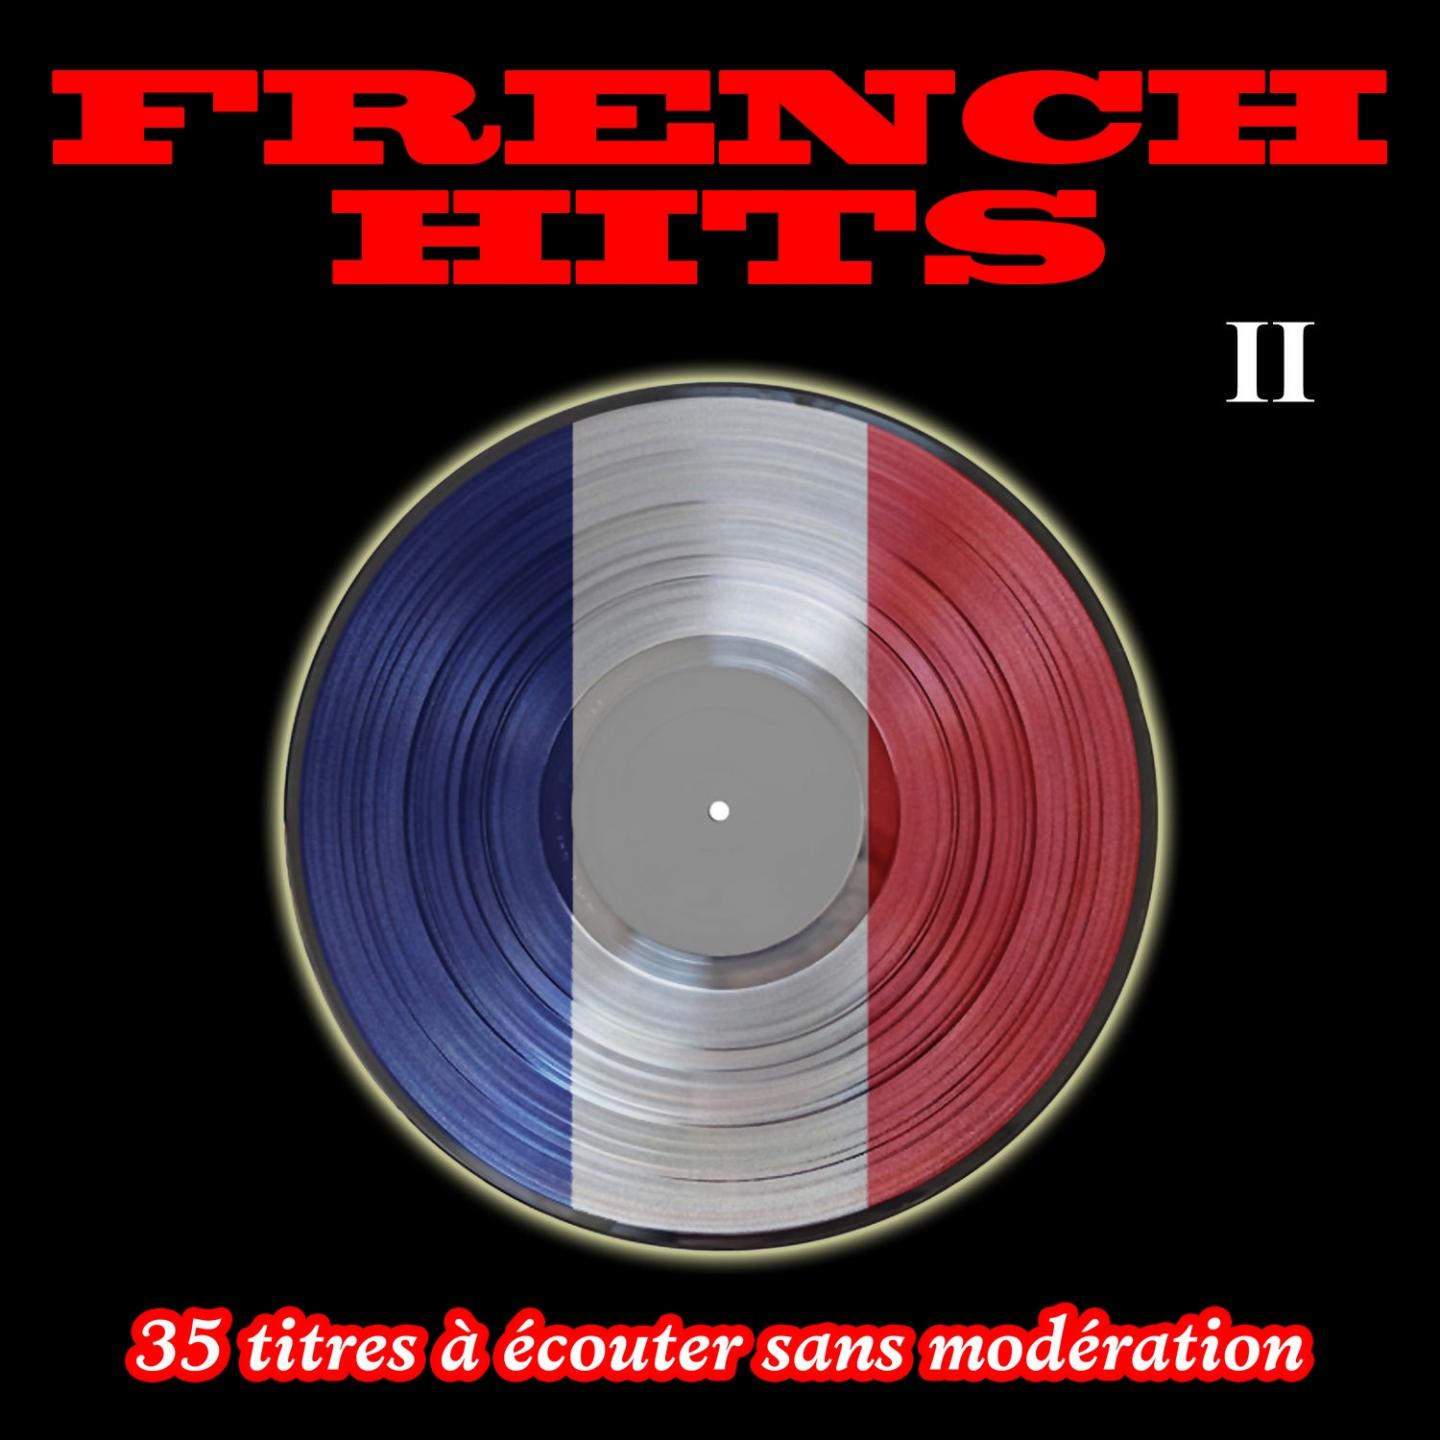 French Hits, Vol. 2